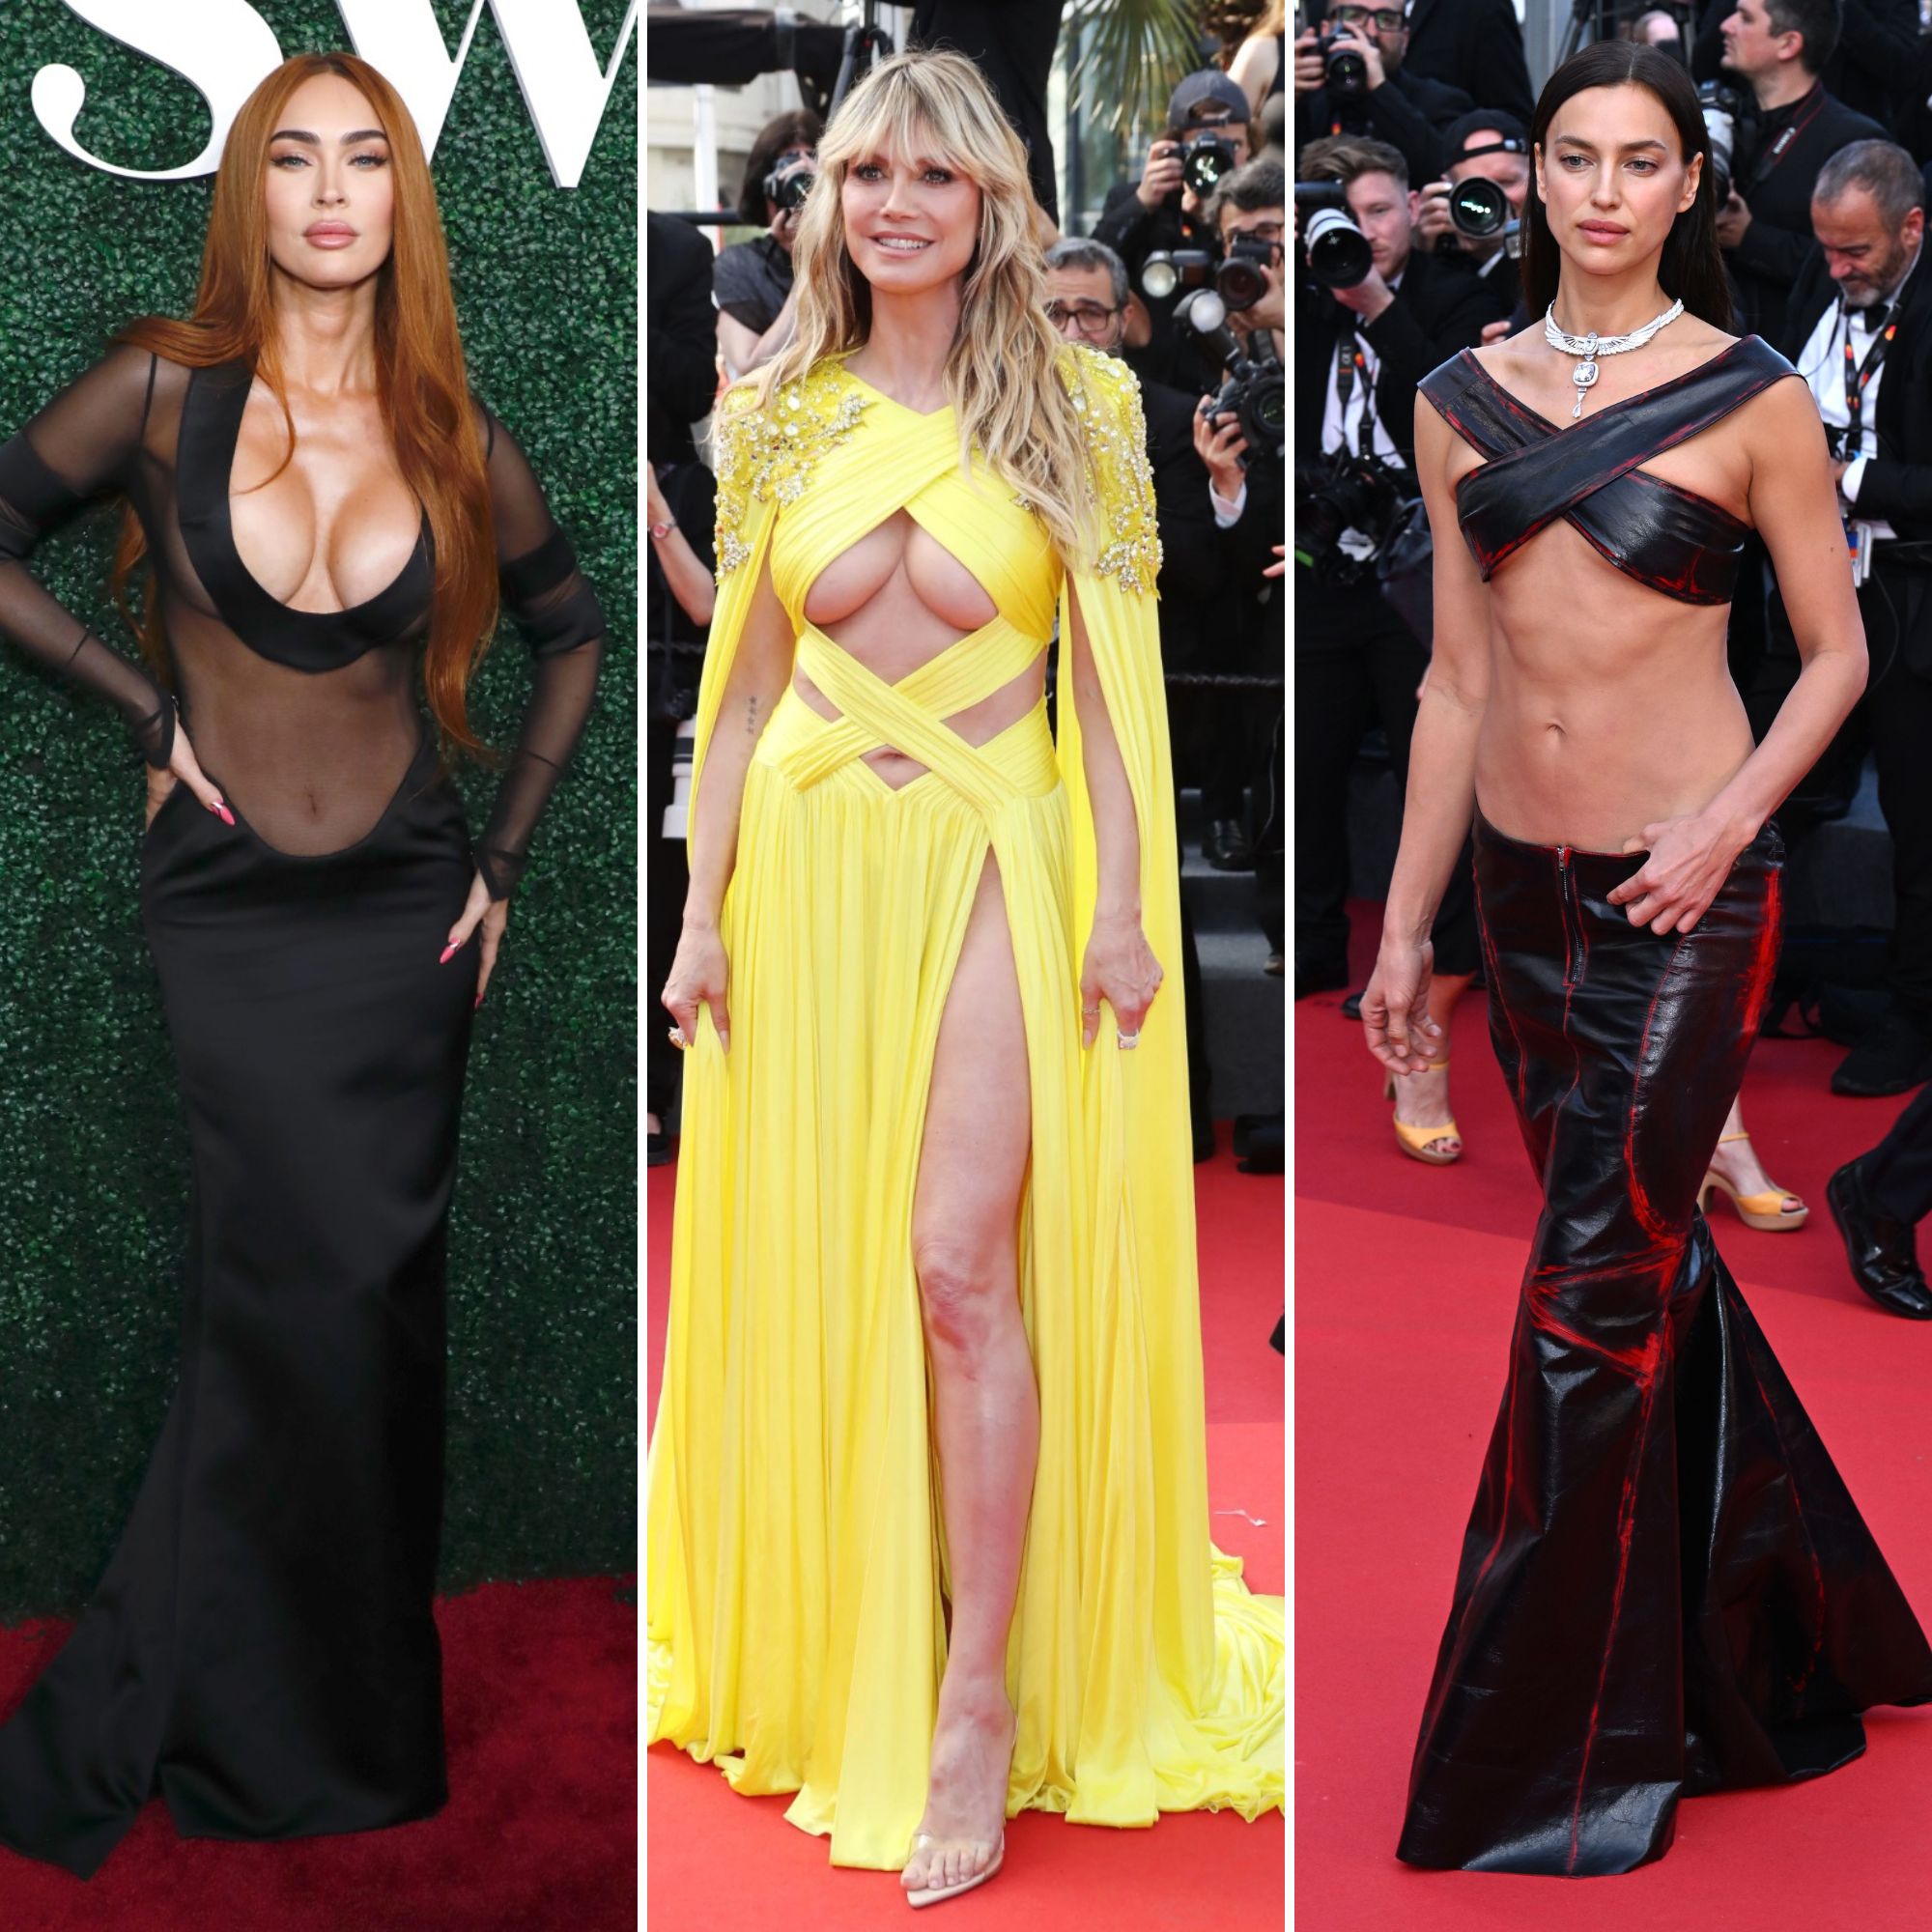 Sexiest Red Carpet Gown - Celebrities' Sexiest Most Revealing Outfits of 2023: Photos